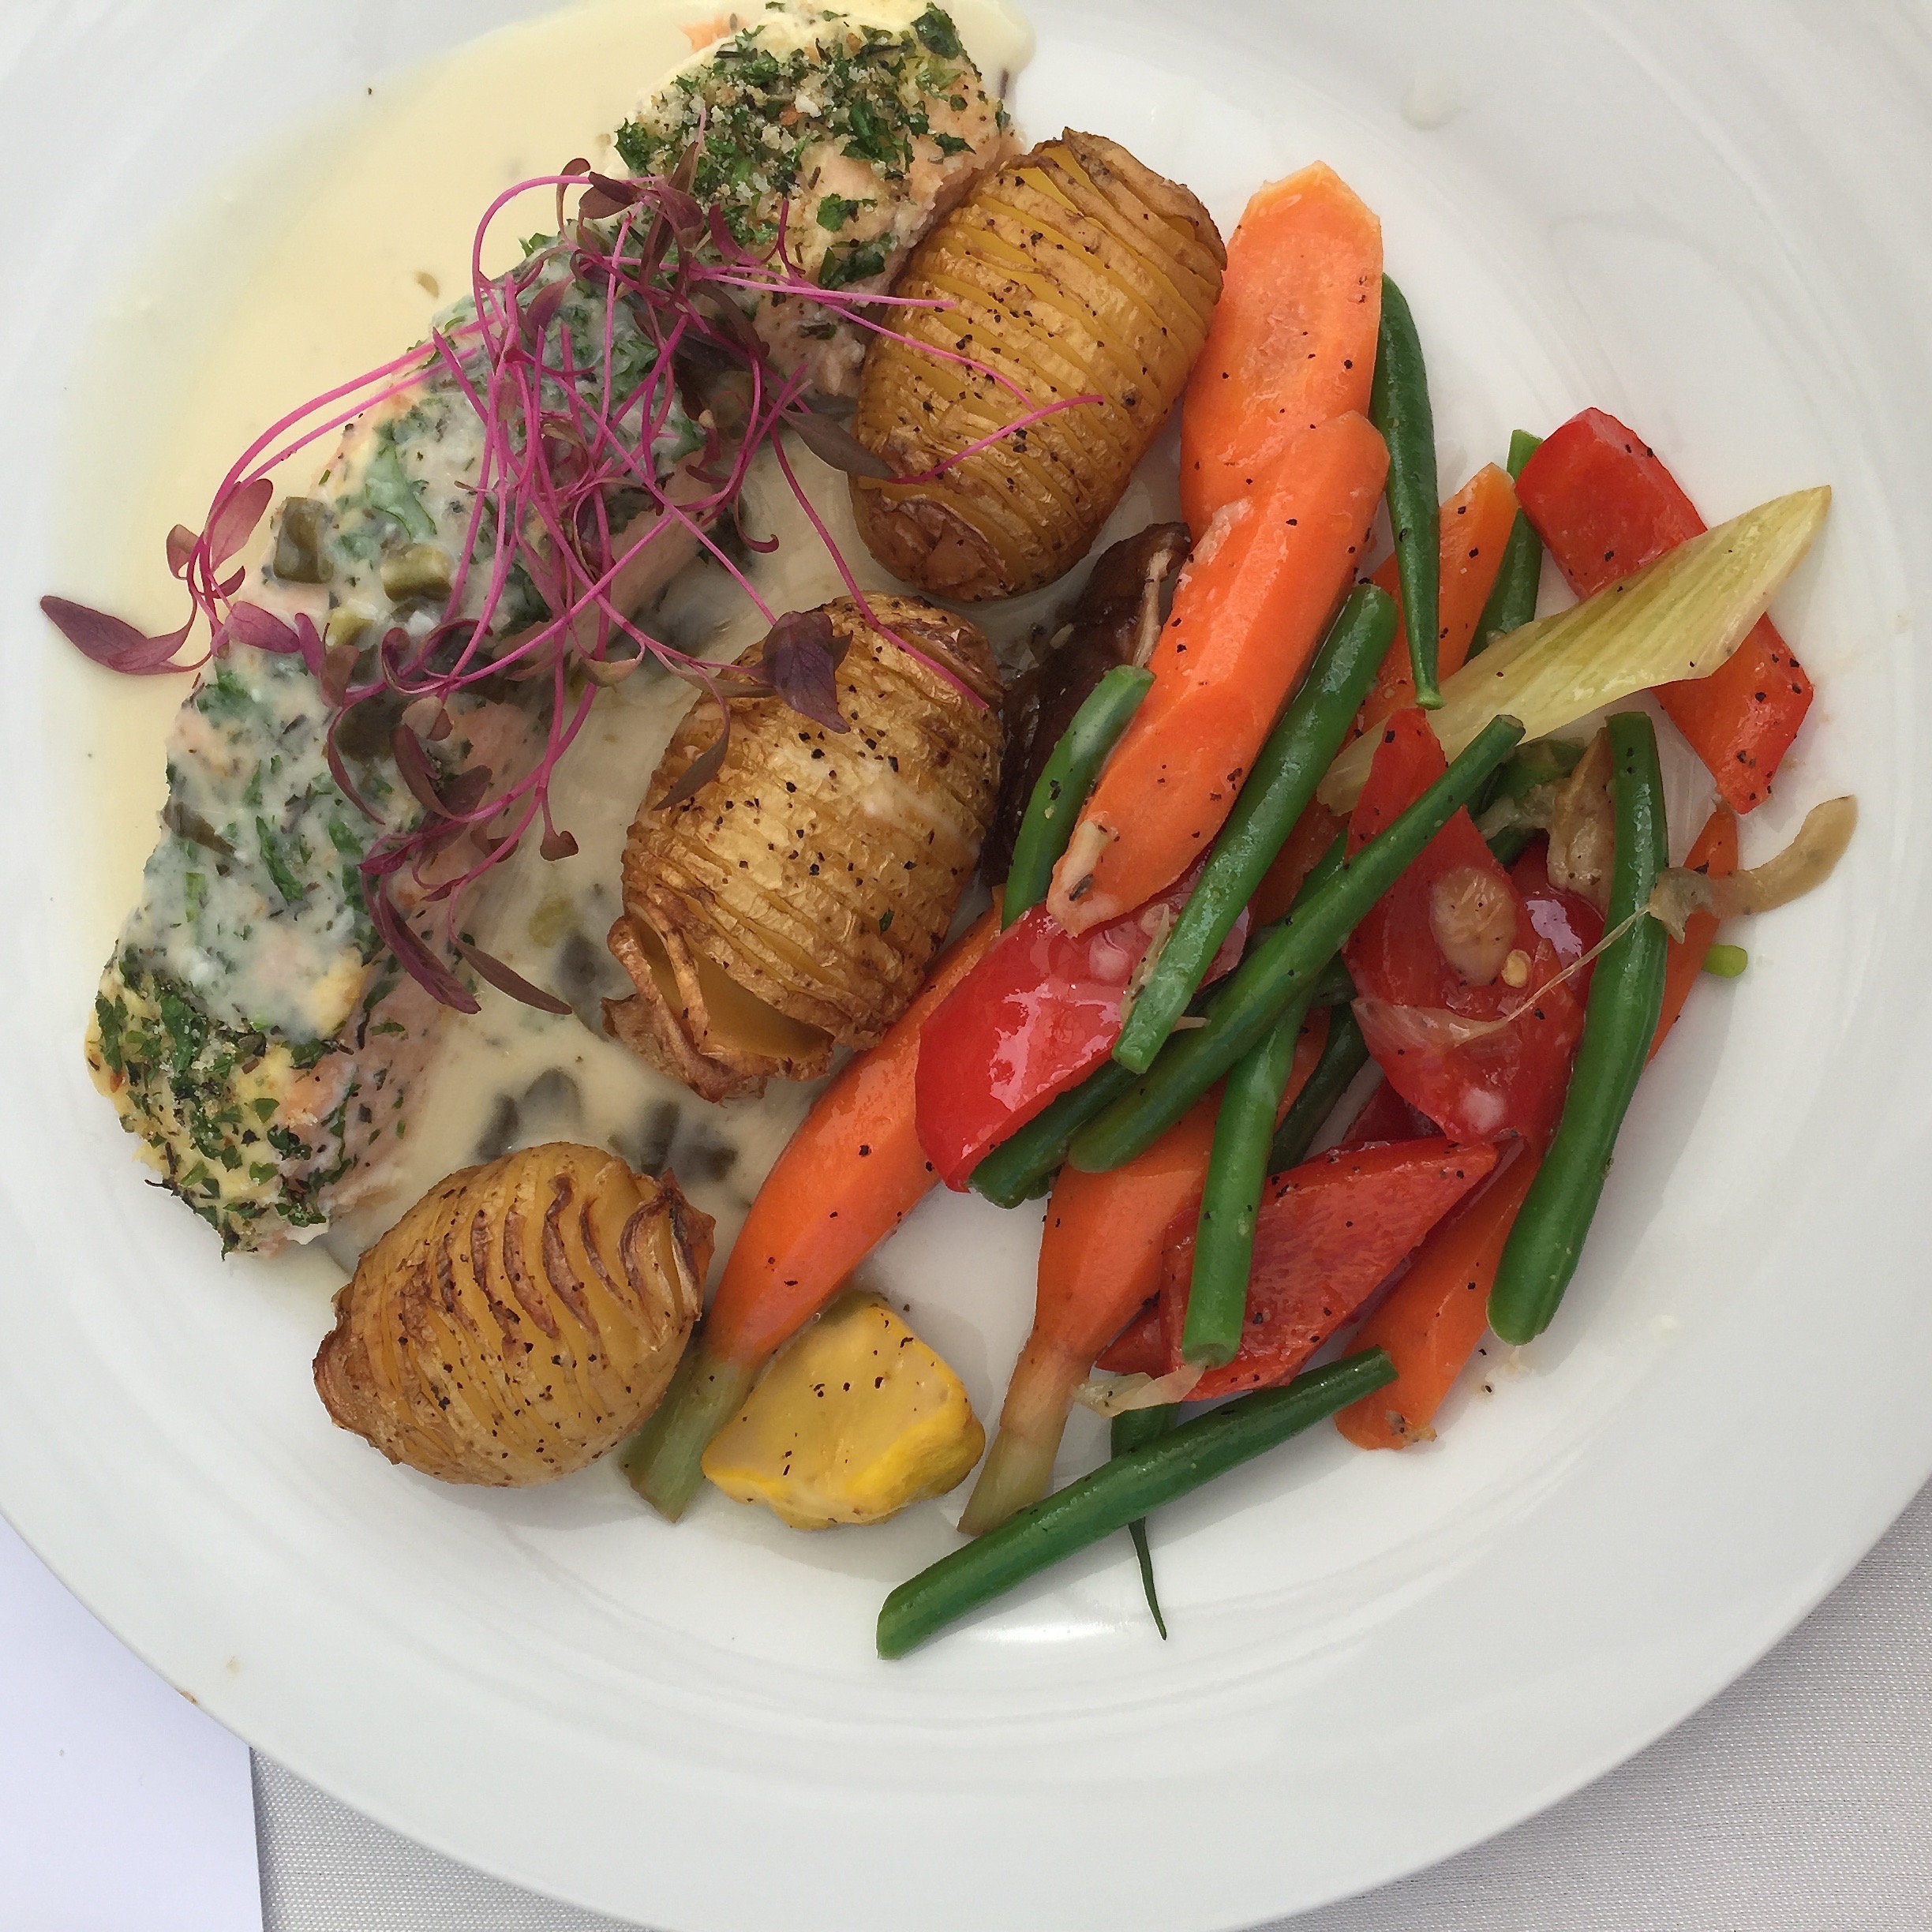  The main was delicious salmon with the prettiest tastiest little potatoes and steamed veg. 